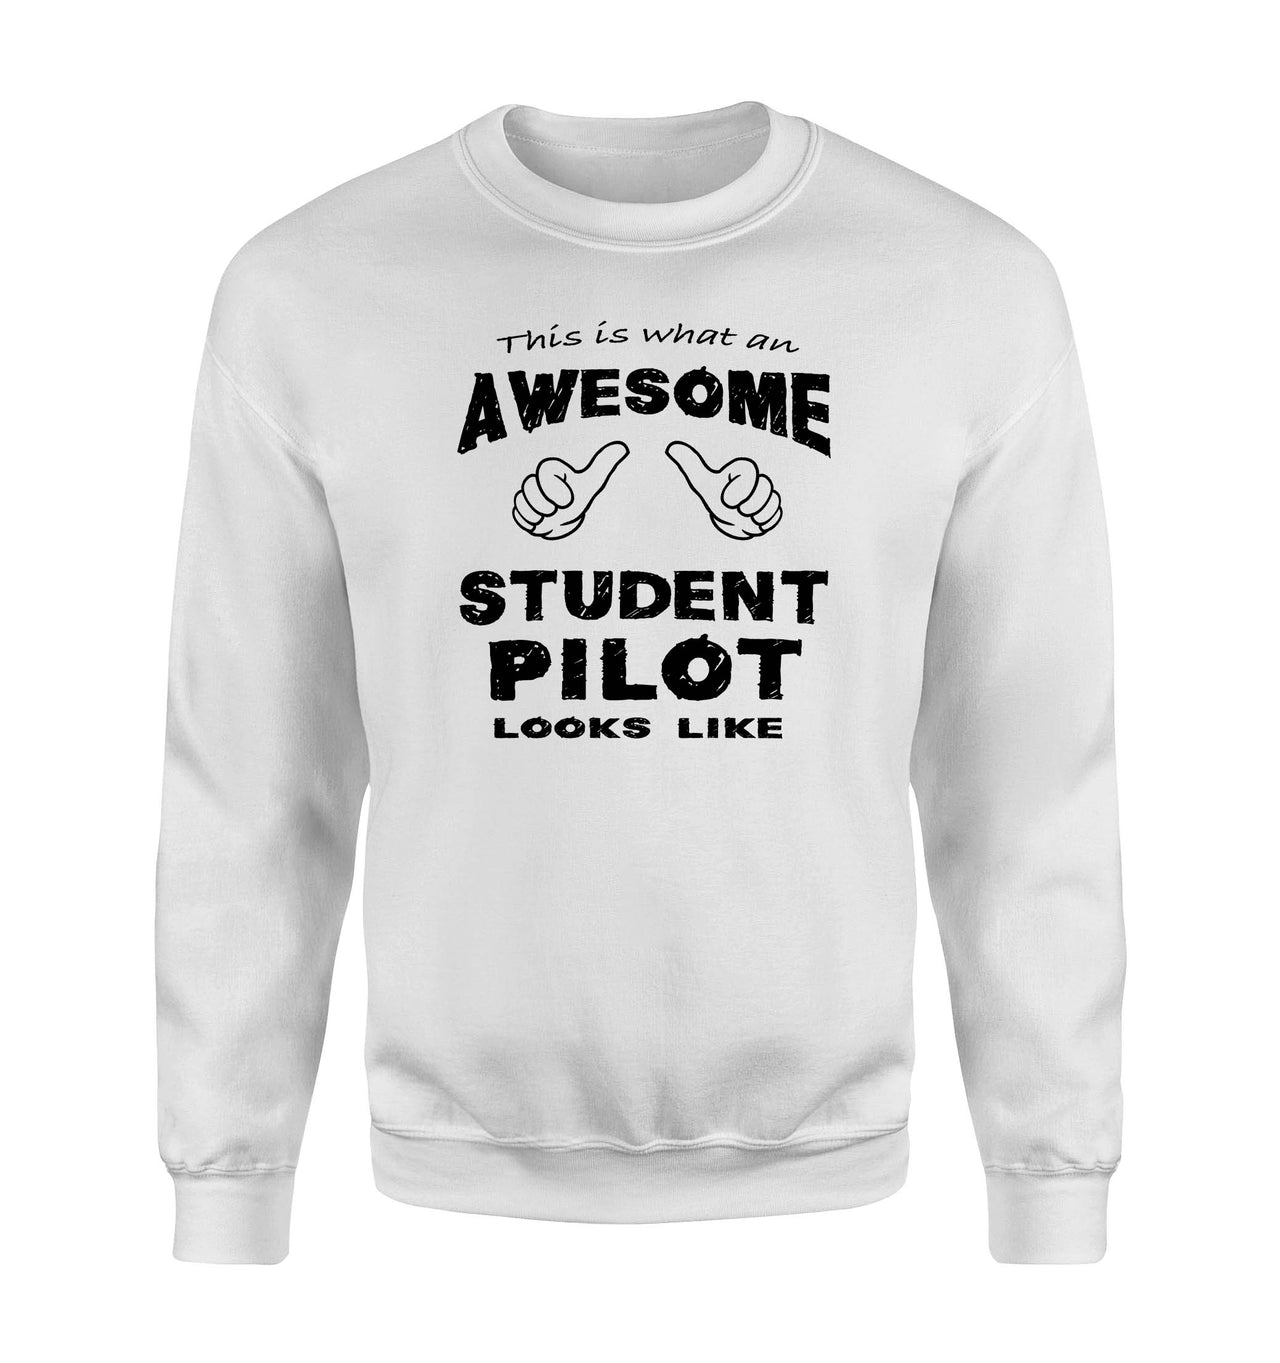 This is What an Awesome Student Pilot Looks Like Sweatshirts